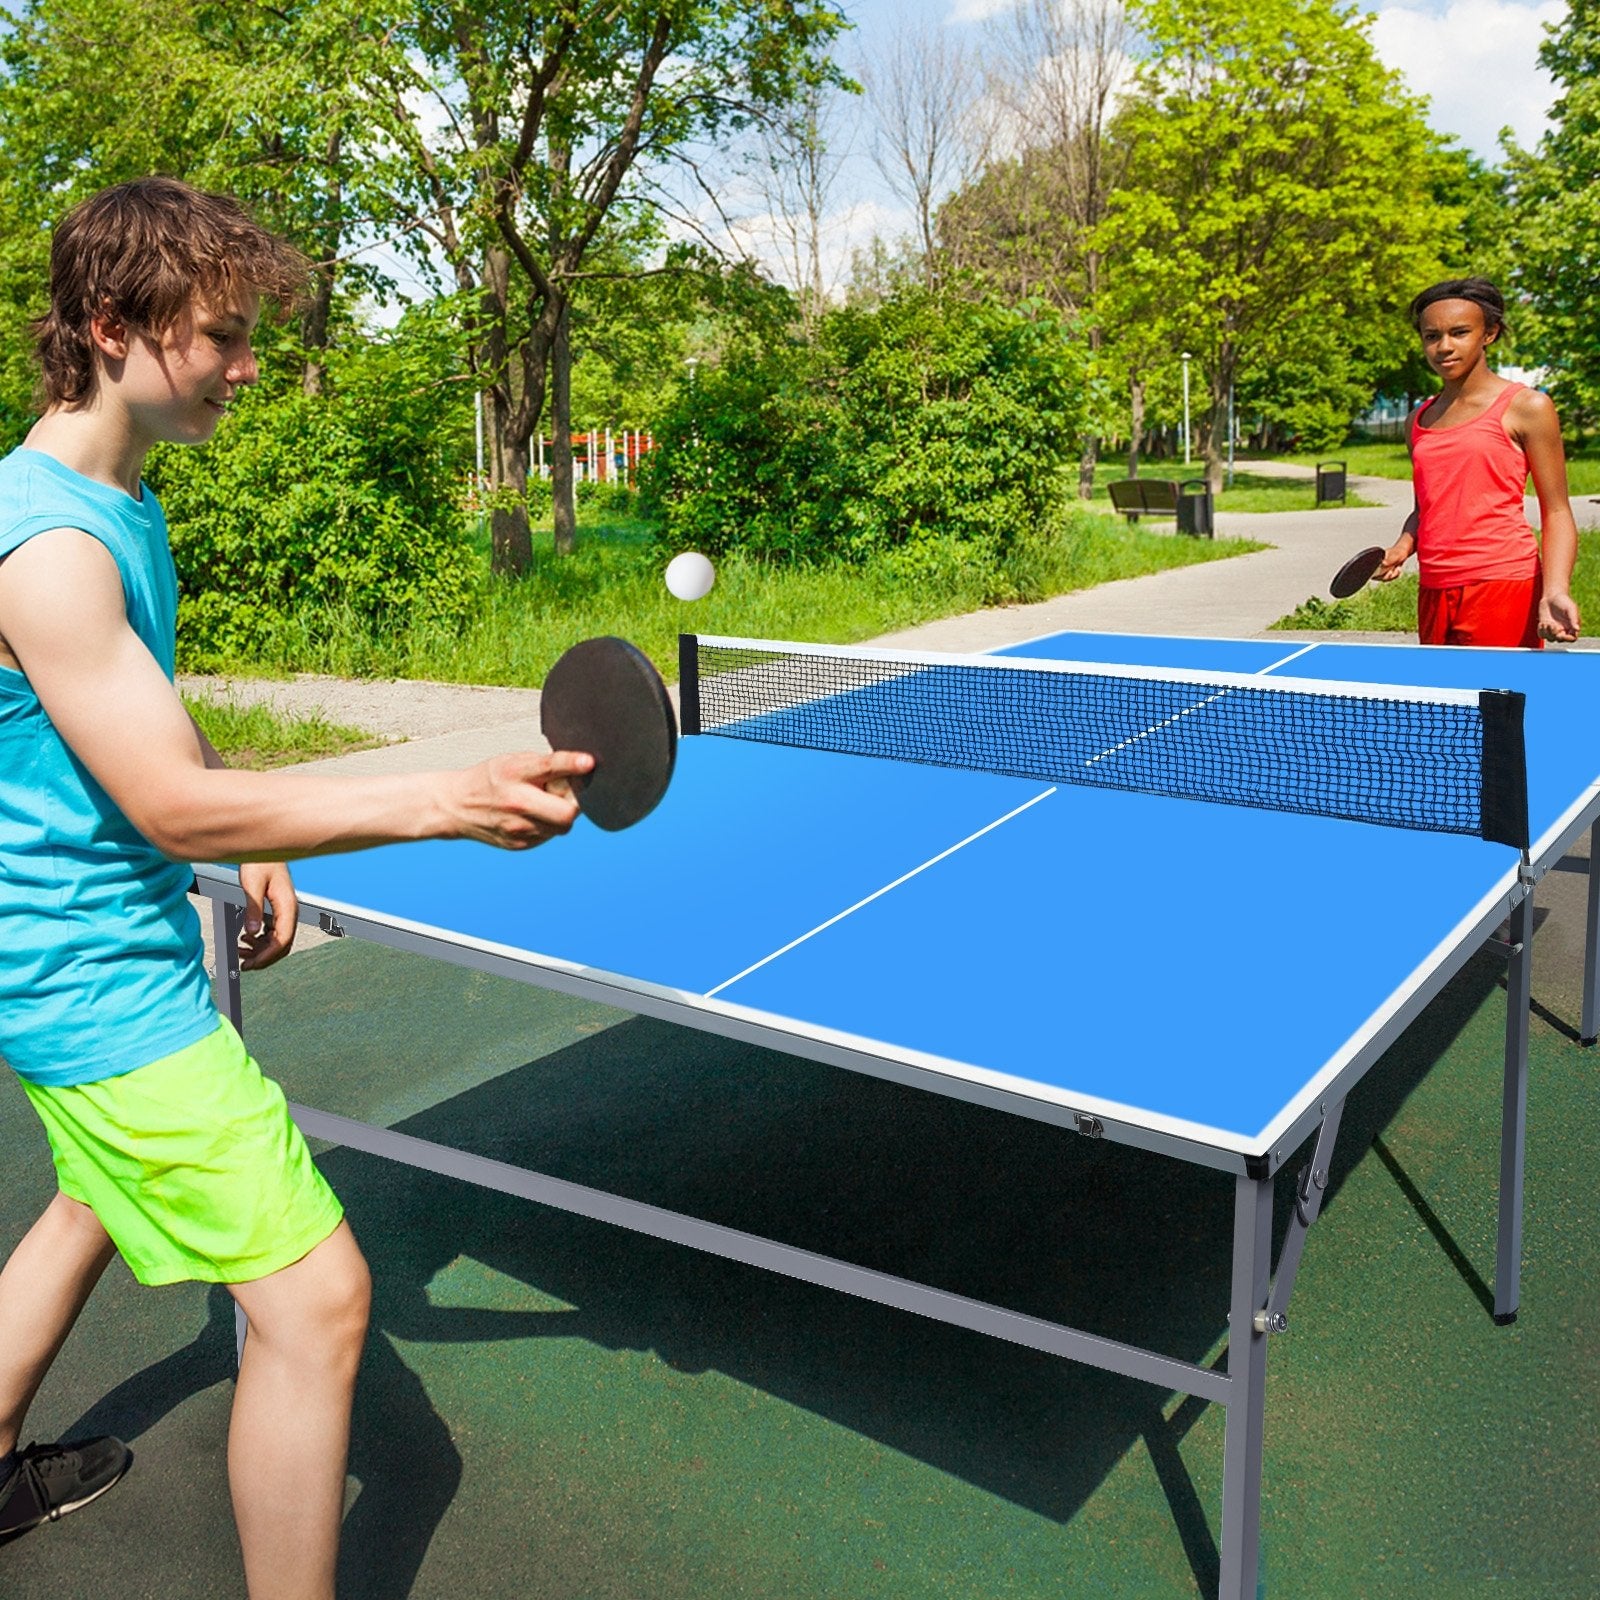 6’x3’ Portable Tennis Ping Pong Folding Table Indoor/Outdoor at Gallery Canada